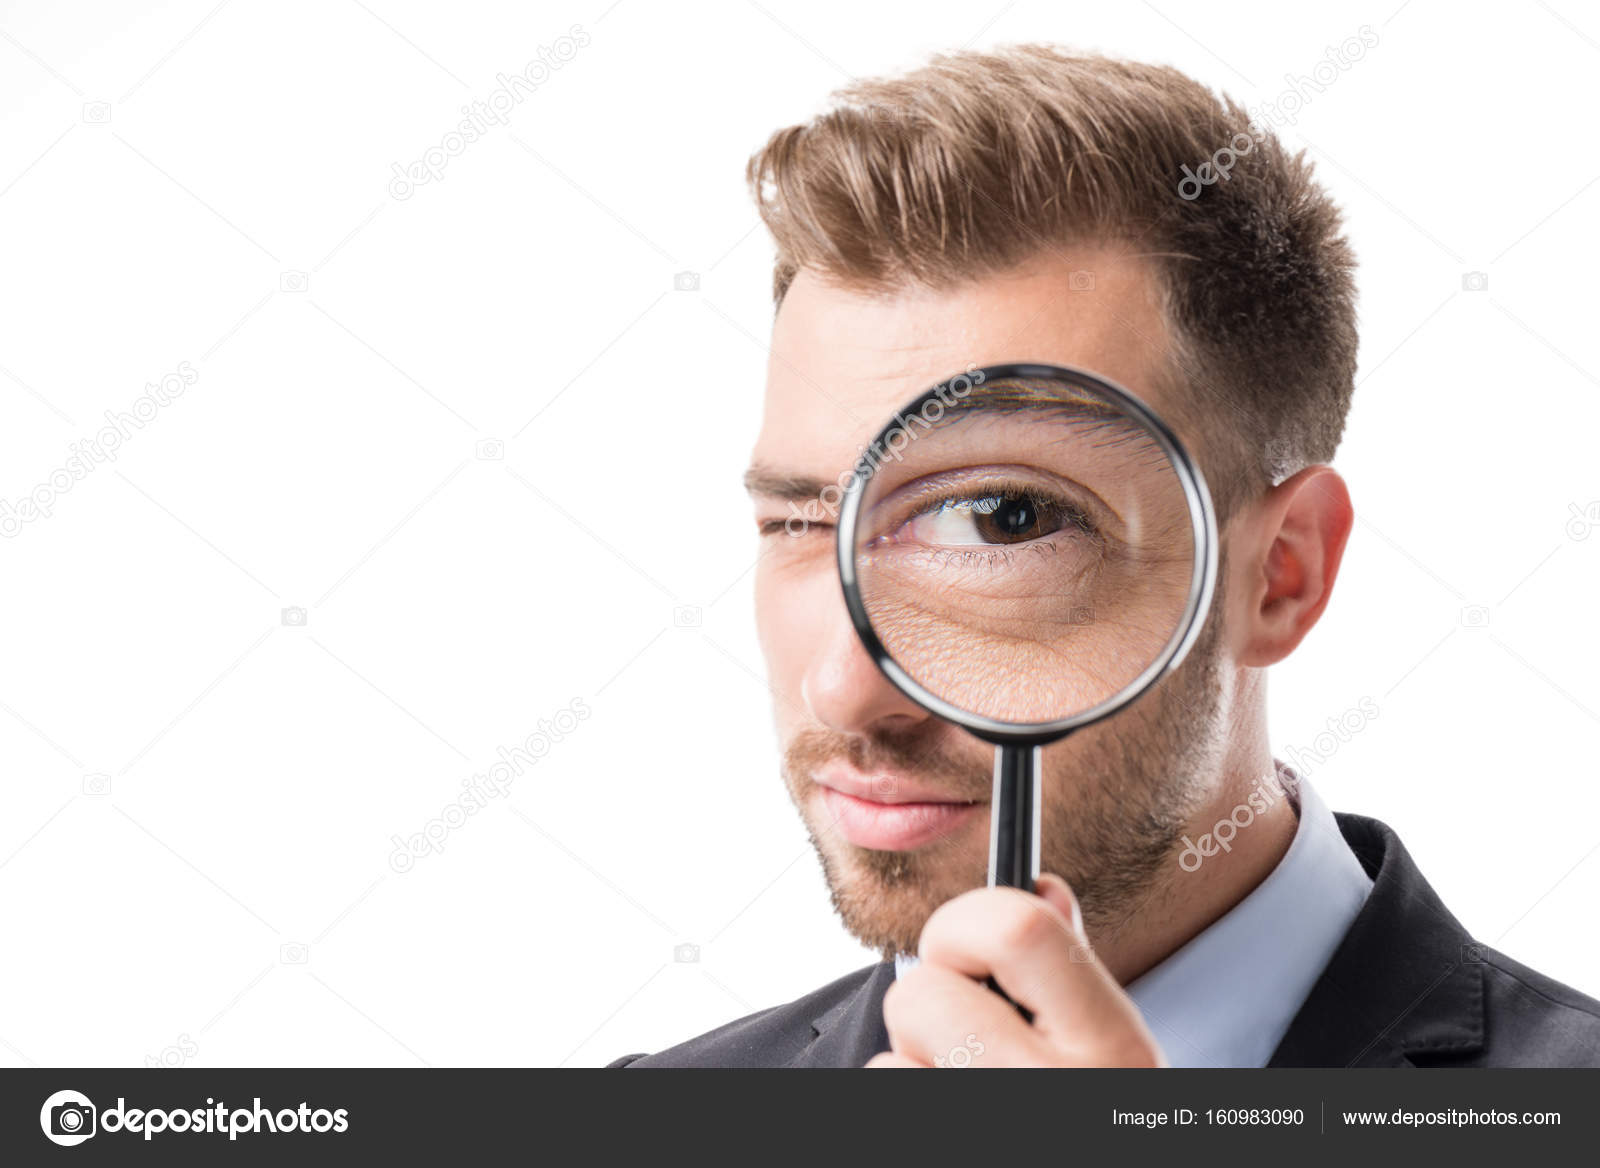 Magnifying Glass Stock Photo